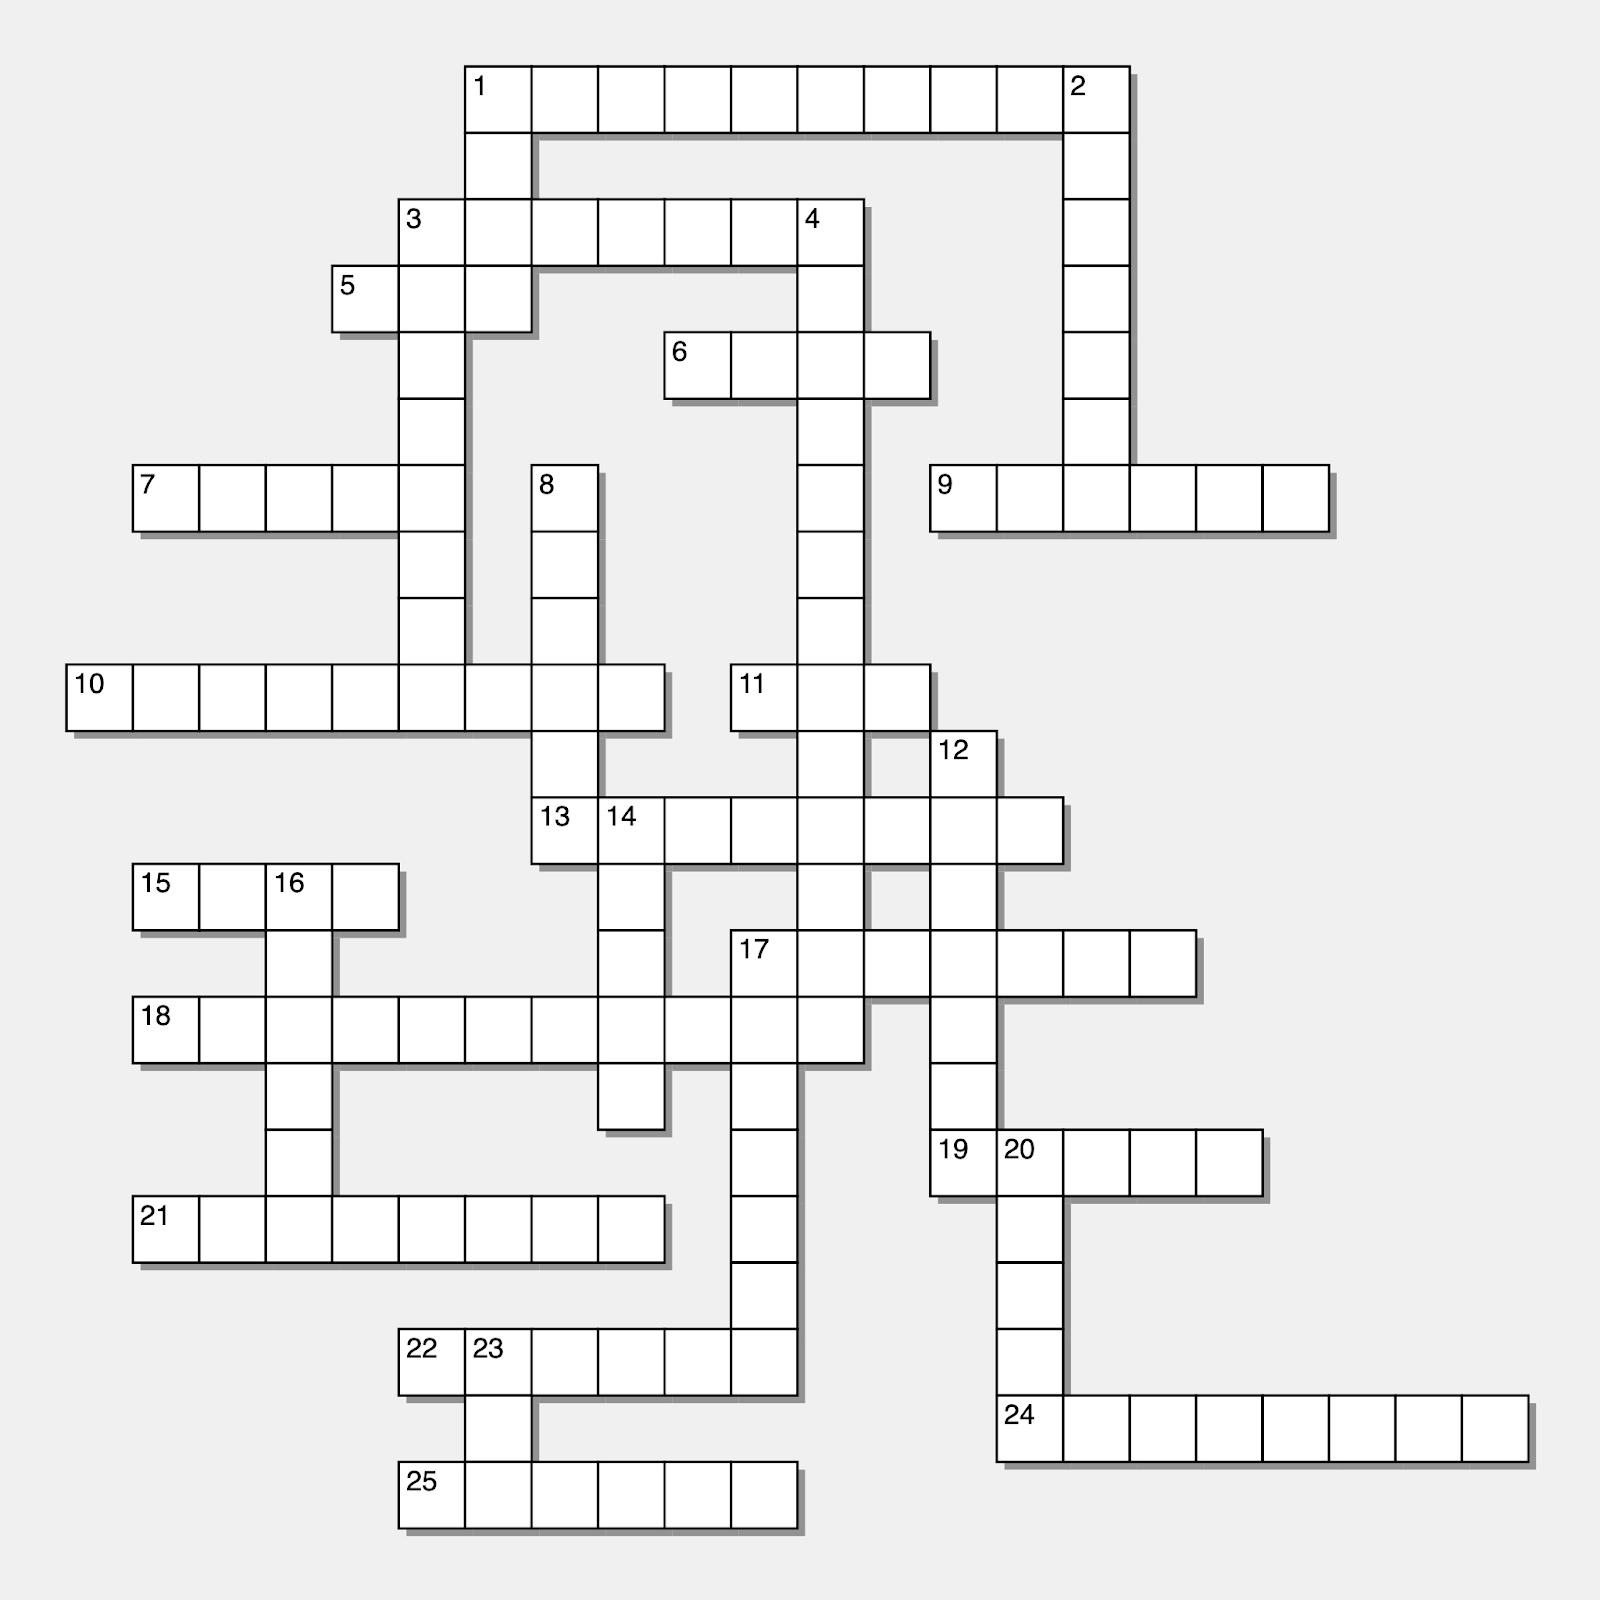 A crossword grid is laid out on the page.